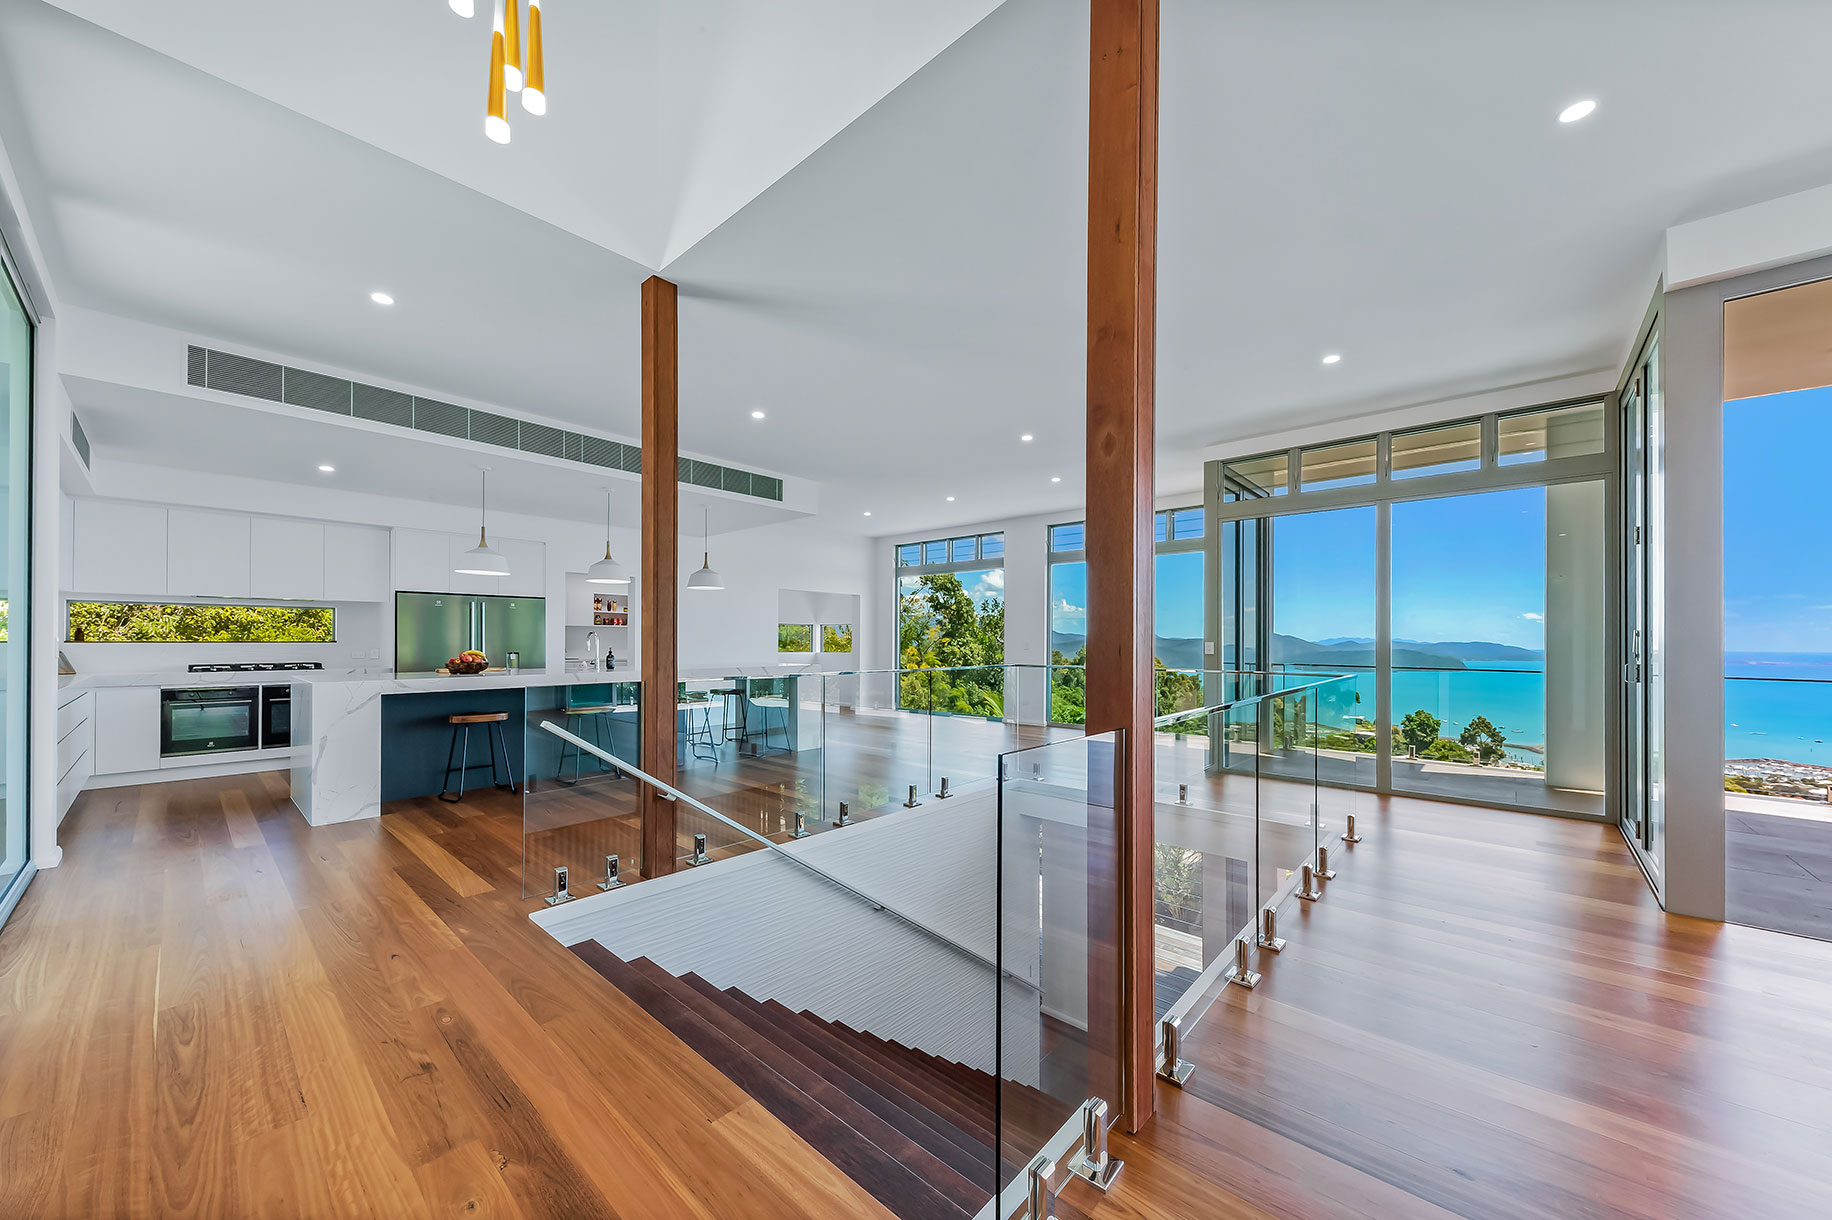 Views to the Coral Sea, and Whitsunday Islands paint glorious natural pictures from floor to ceiling windows.